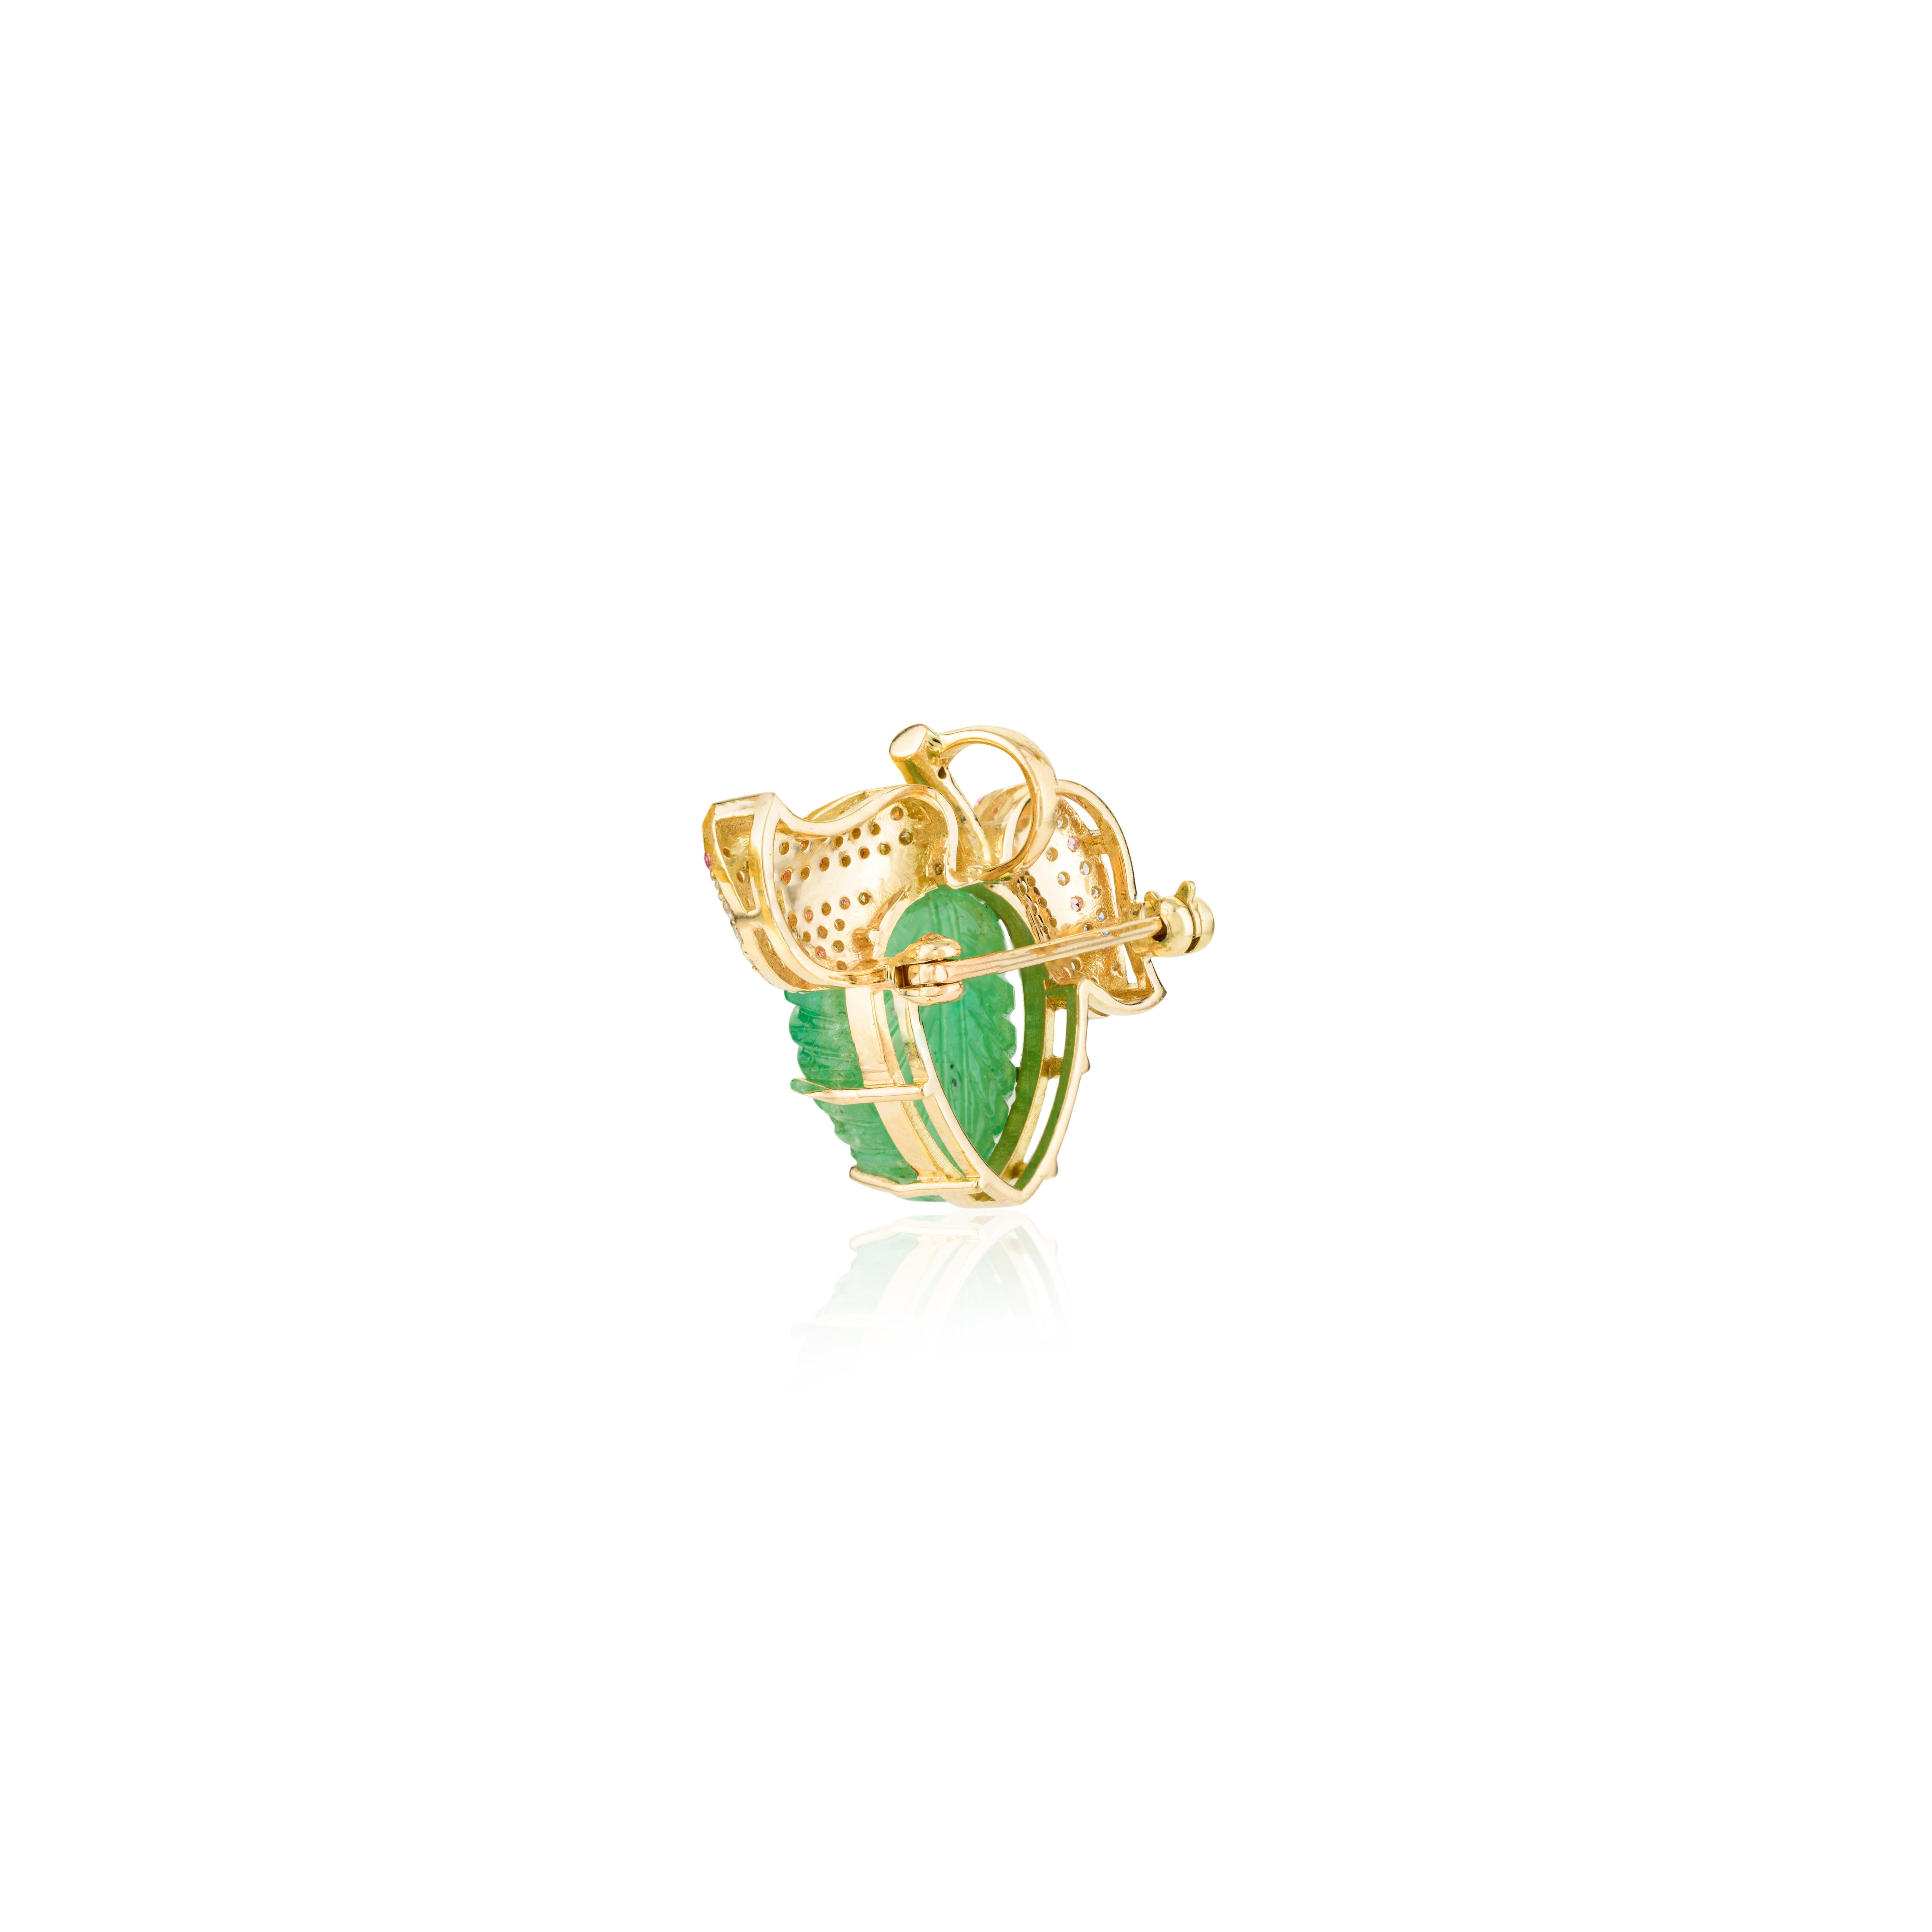 Women's Unisex 8.88 Carat Carved Emerald Diamond Leaf Brooch Pin Gift in 18k Yellow Gold For Sale